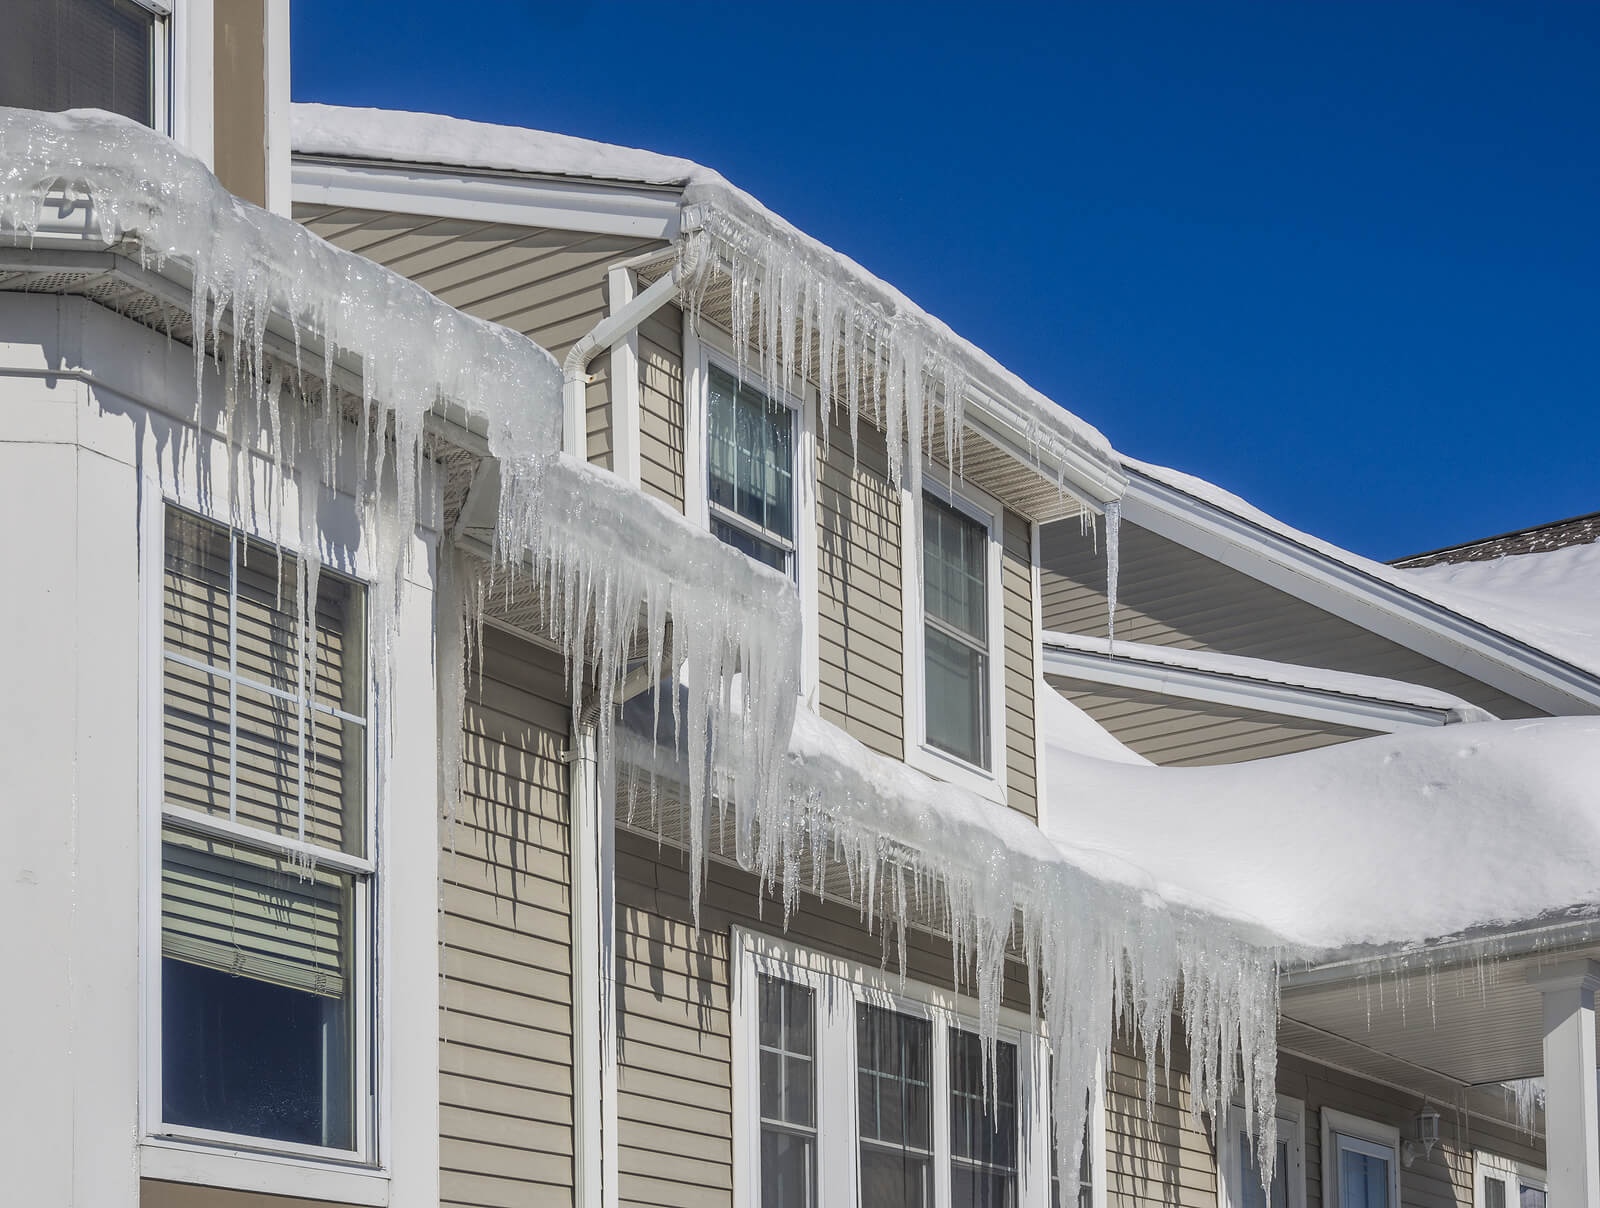 How Do I Prevent and Remove Ice Dams on My Roof?